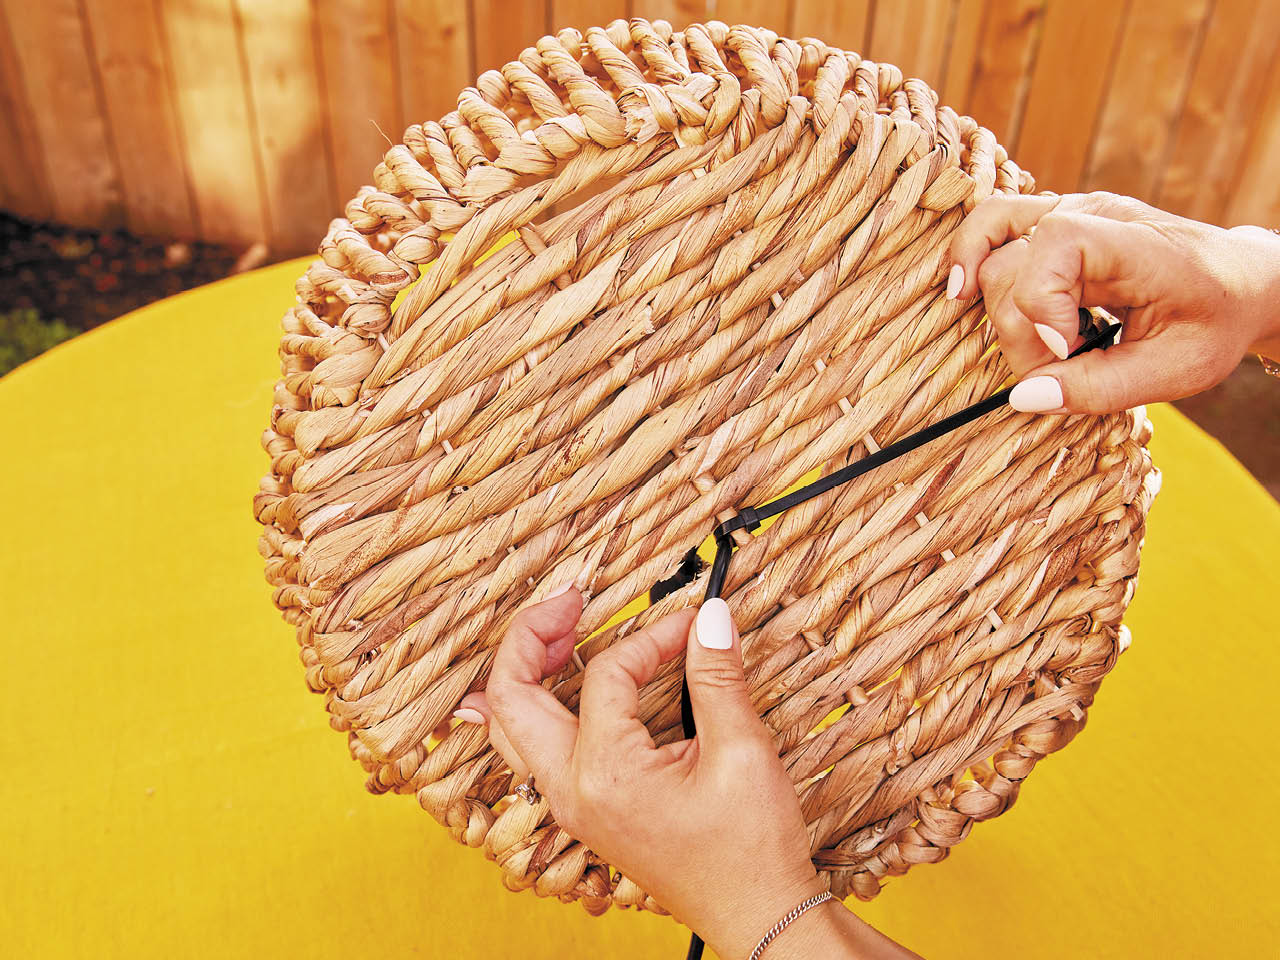 A wicker basket being transformed into a lampshade for a solar-powered outdoor pendant light.